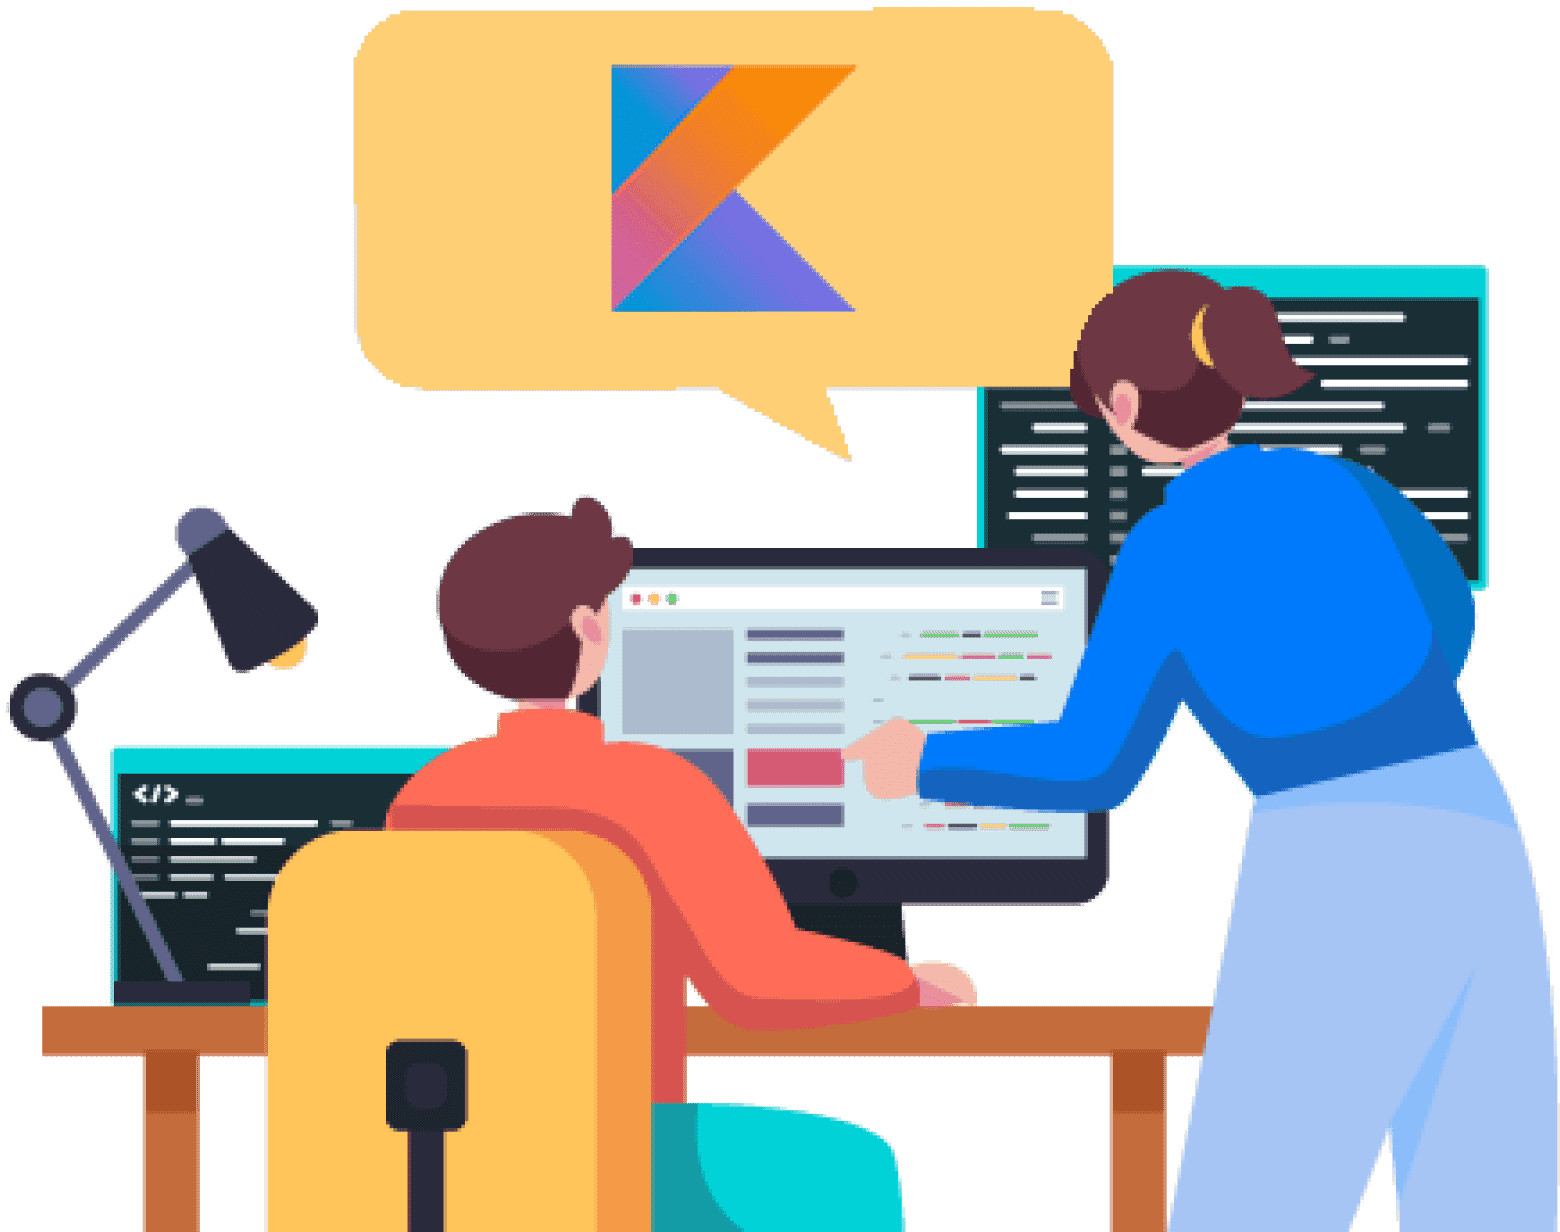 Get a Quote from Our Kotlin Development Experts